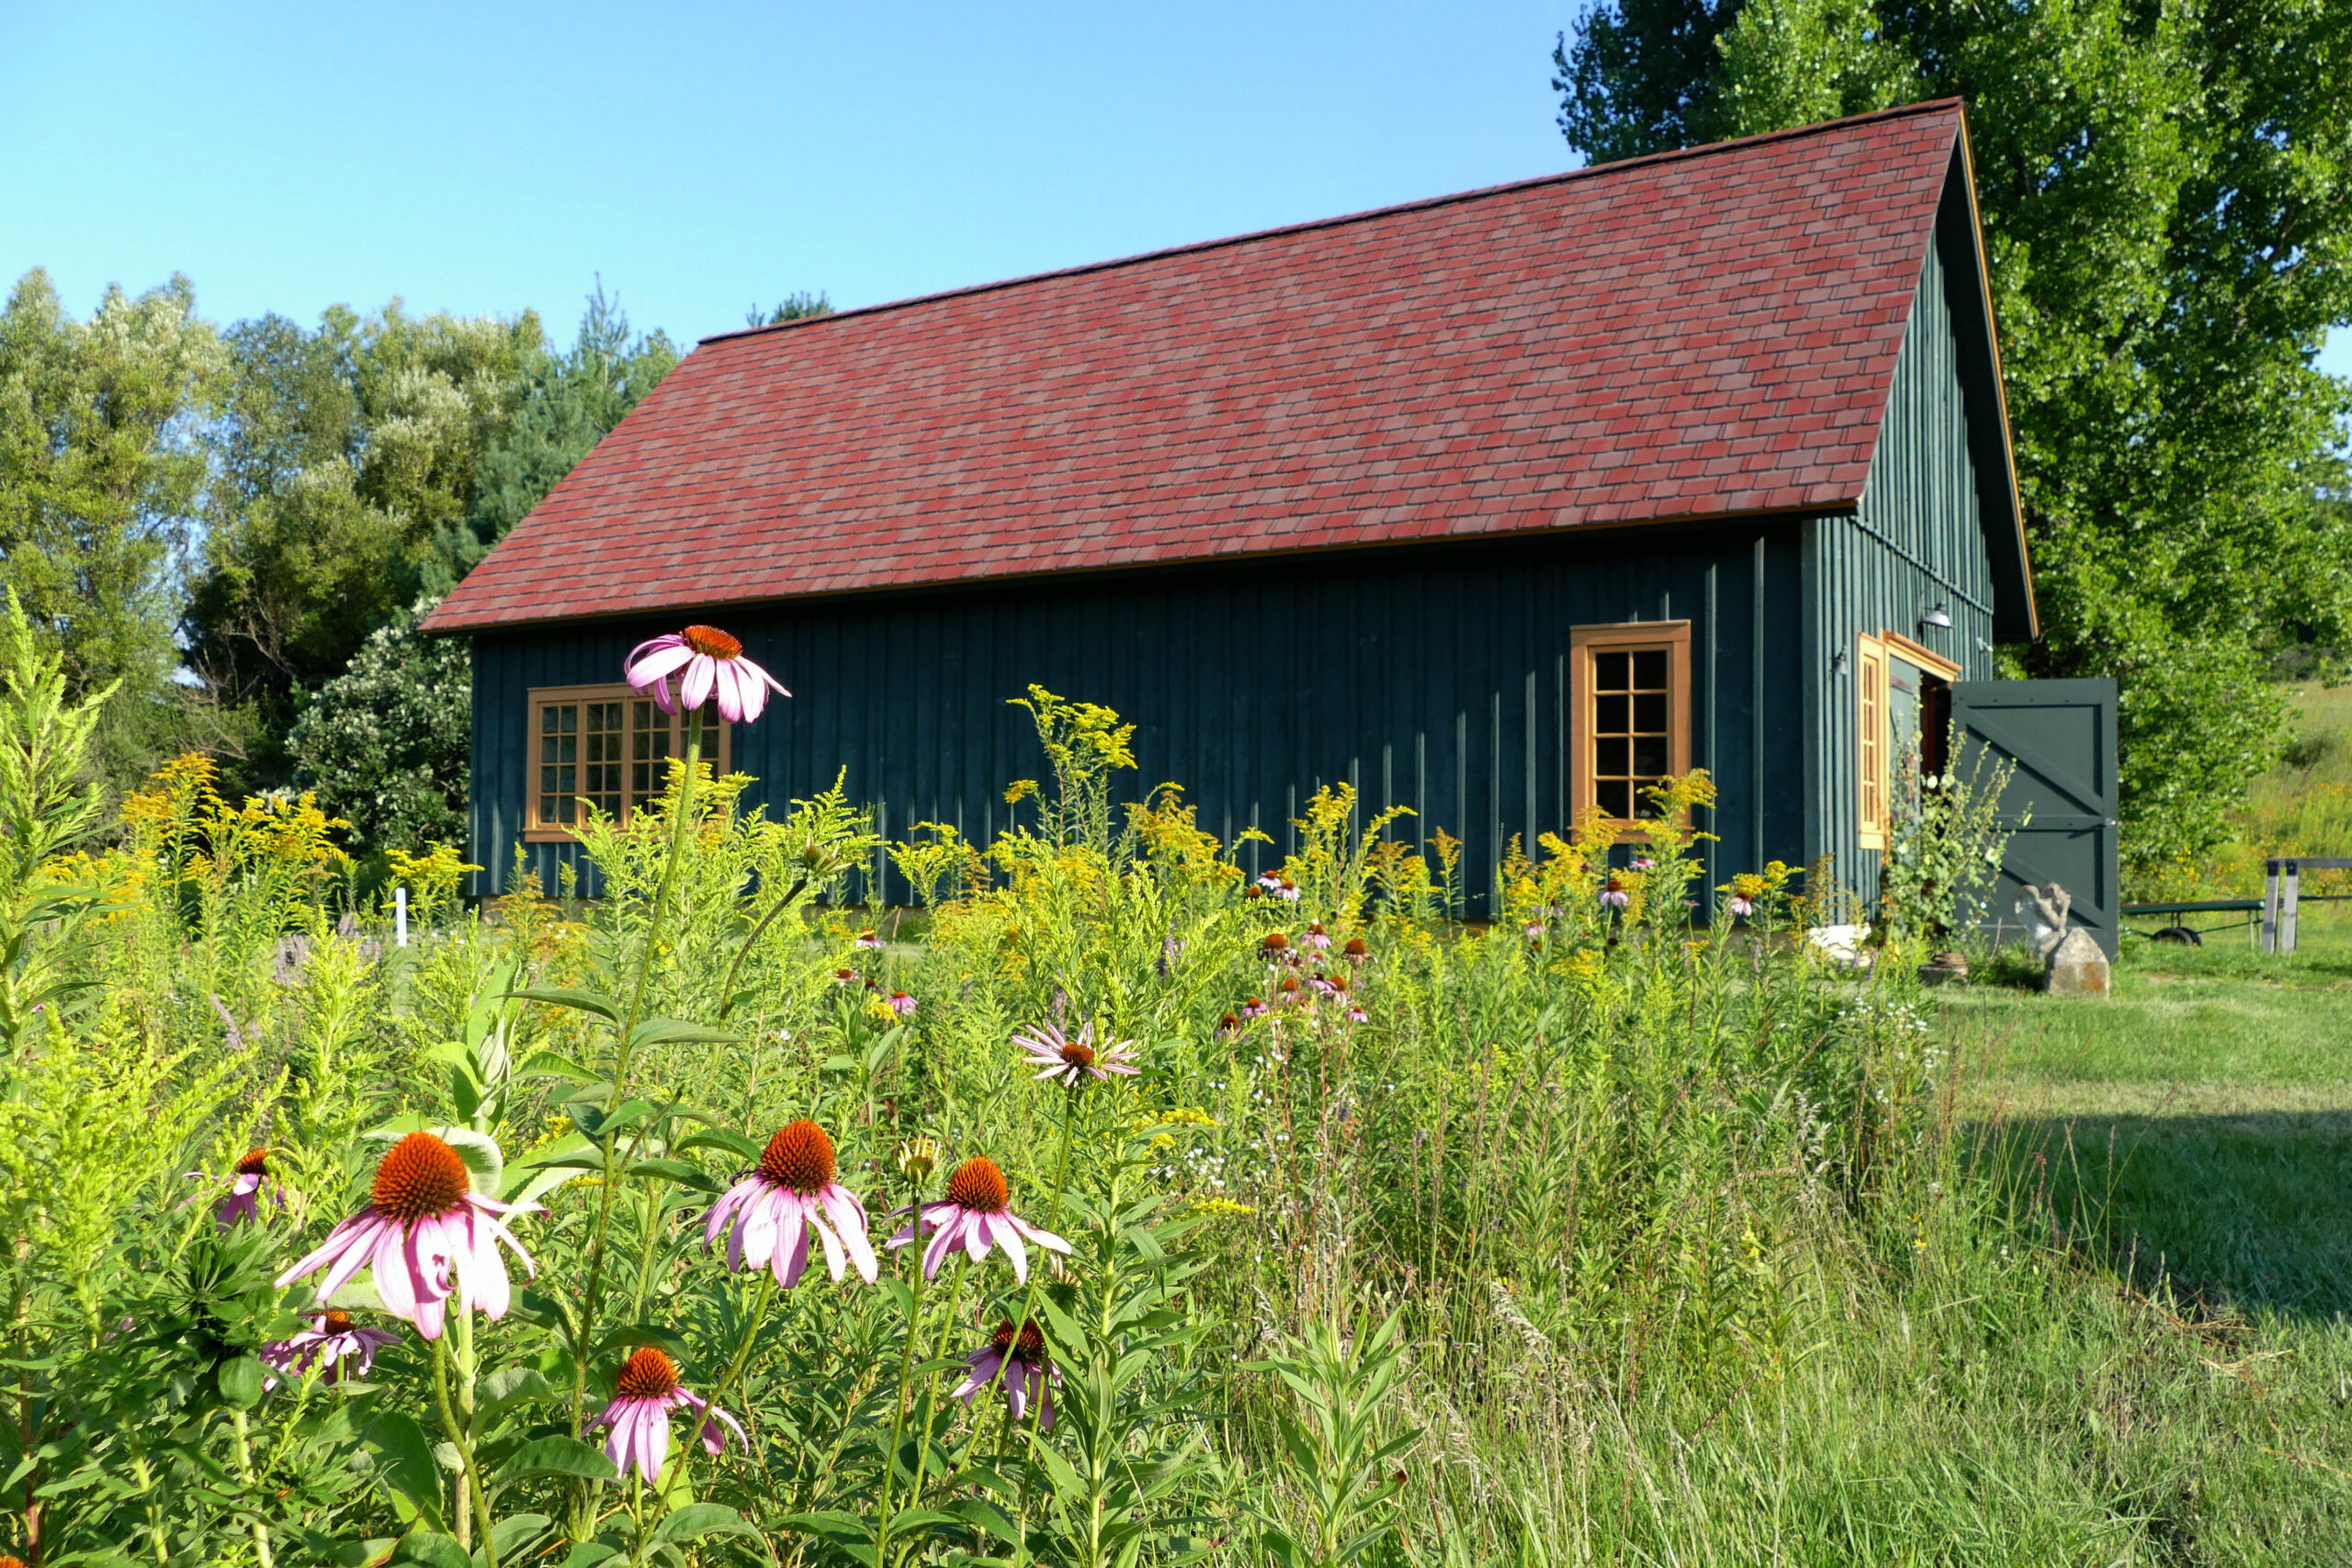 Perennial flowers, including coneflower and goldenrod, bloom beside a large dark green building used as an art studio and workshop. The building has several windows with mustard-colored trim and one of the large barn-door entrances is open.